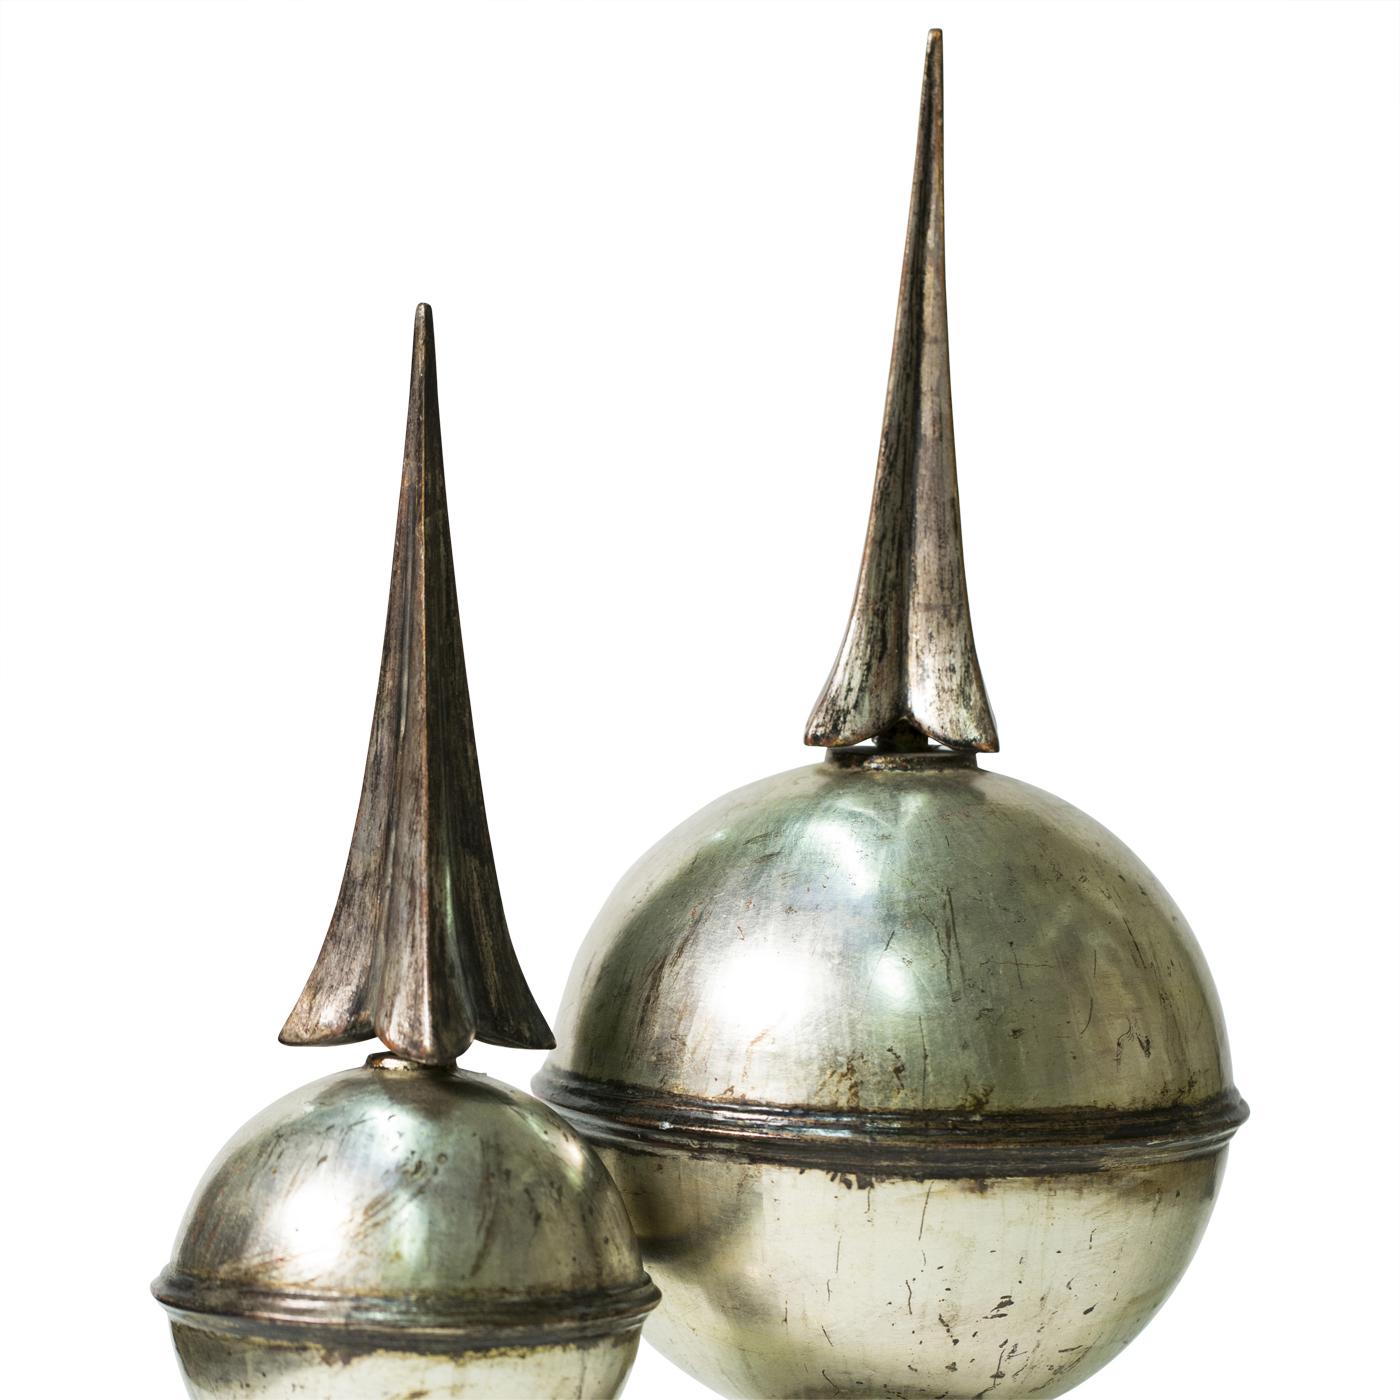 This pair of spherical ornaments adorned with spikes are an original design of master woodcarvers Castorina, inspired by similar objects found atop chimneys and bell-towers. The pieces are entirely carved by hand and finished in silver leaf for a